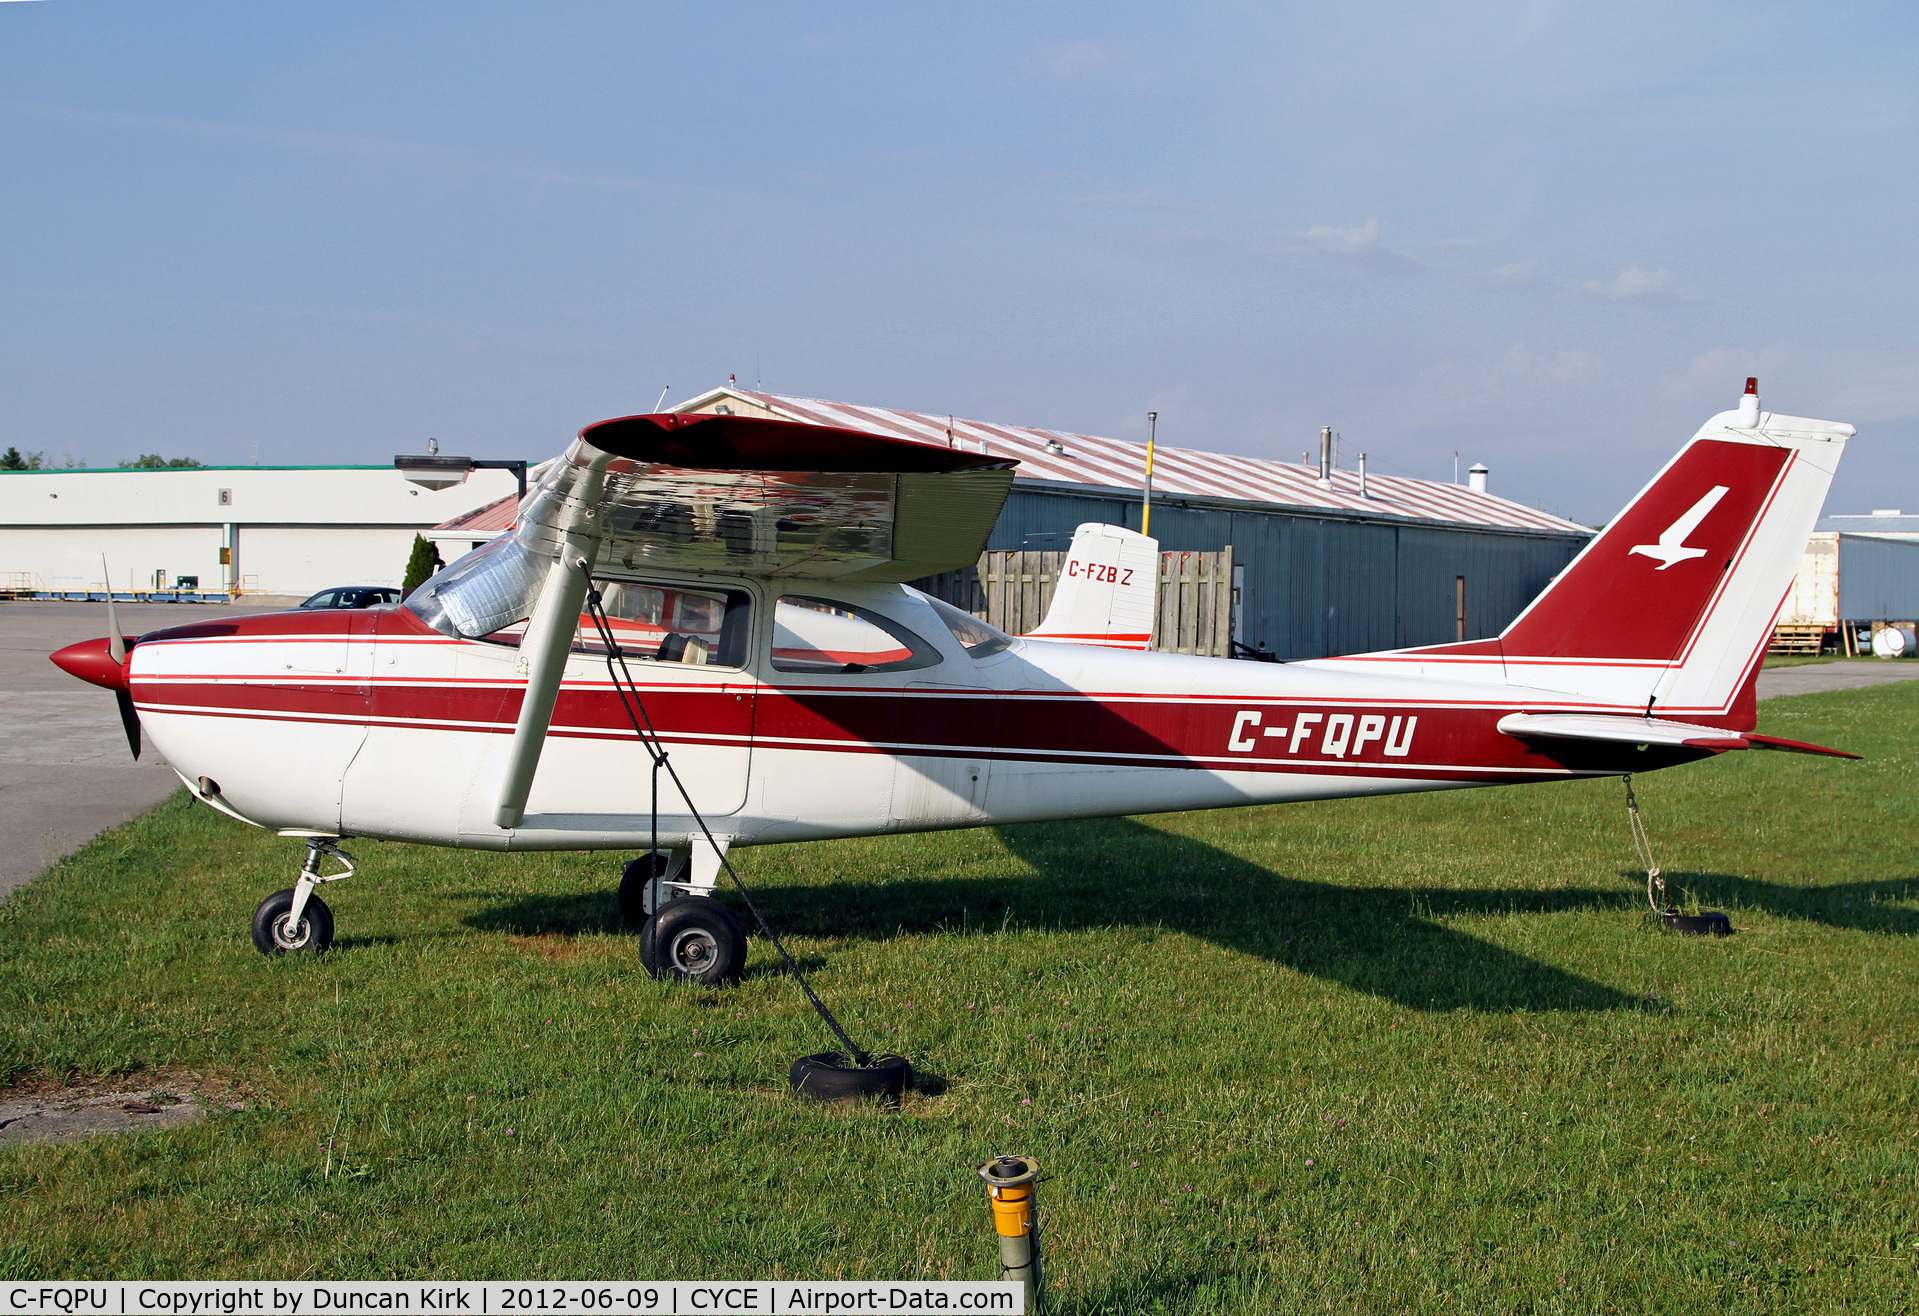 C-FQPU, 1964 Cessna 172E C/N 17250949, Most aircraft at Huron Park had a Q in the registration. Why?